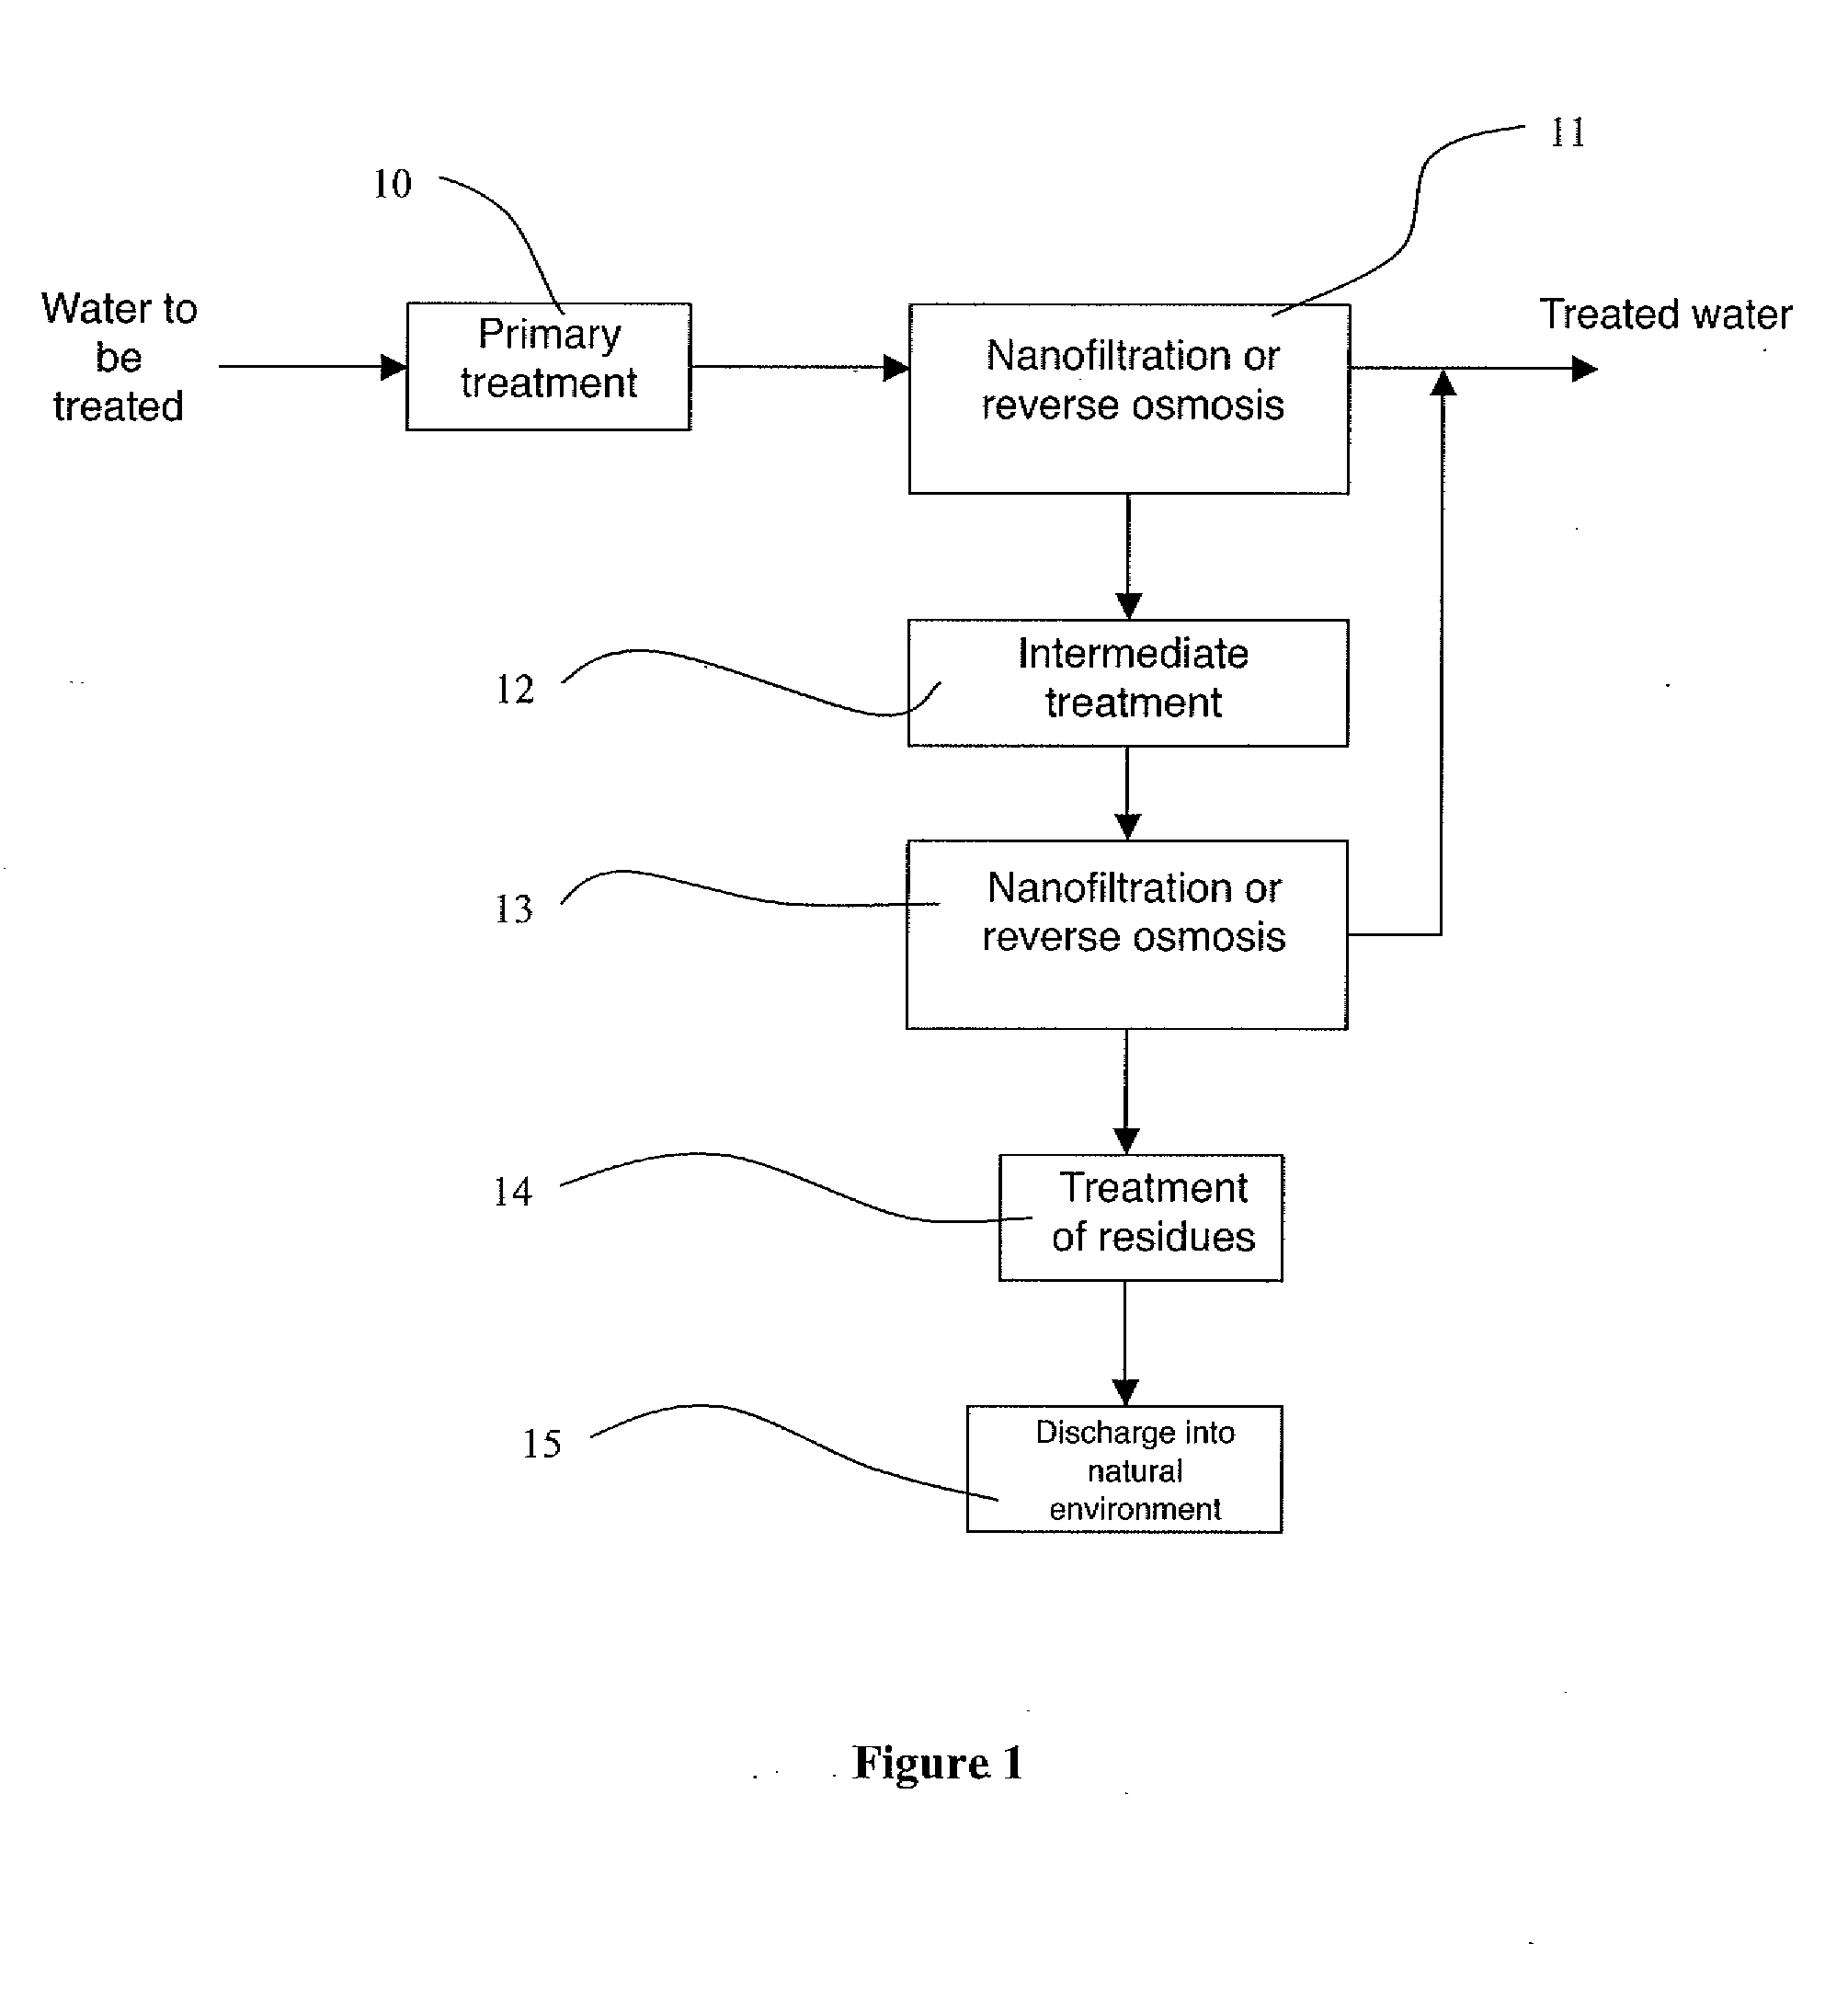 Process for treating water by a nanofiltration or reverse osmosis membrane system enabling high conversion rates due to the elimination of organic matter